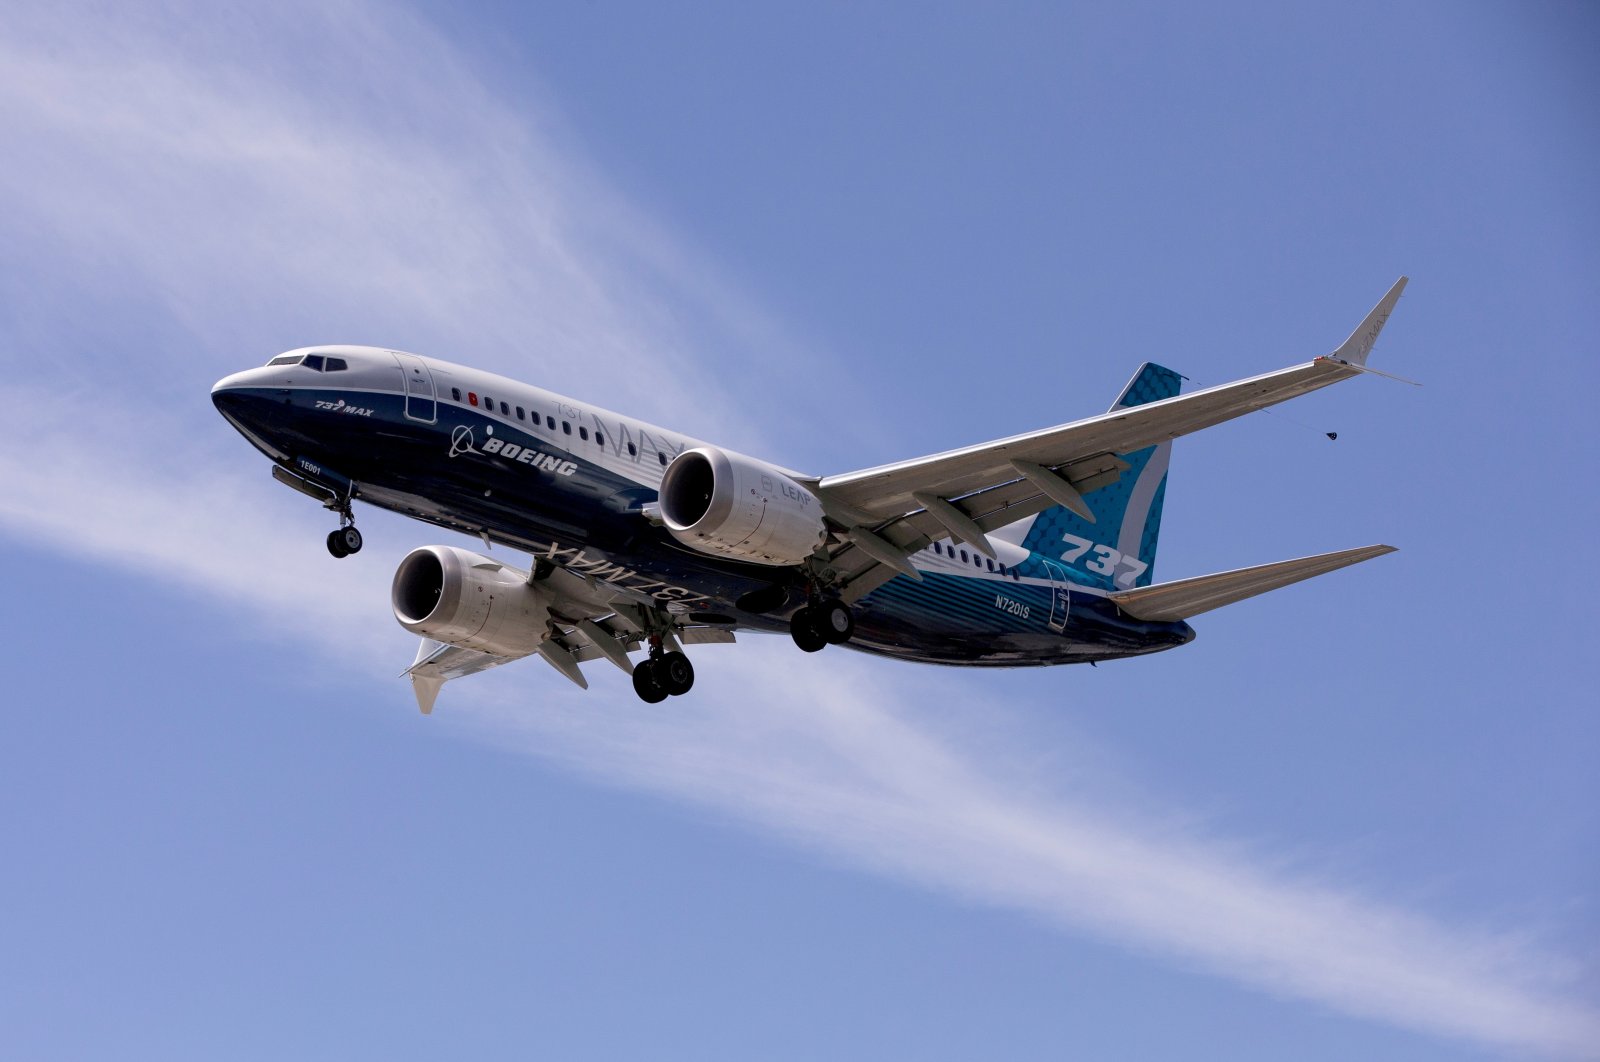 A Boeing 737 MAX airplane lands after a test flight at Boeing Field, Seattle, Washington, U.S., June 29, 2020. (Reuters Photo)